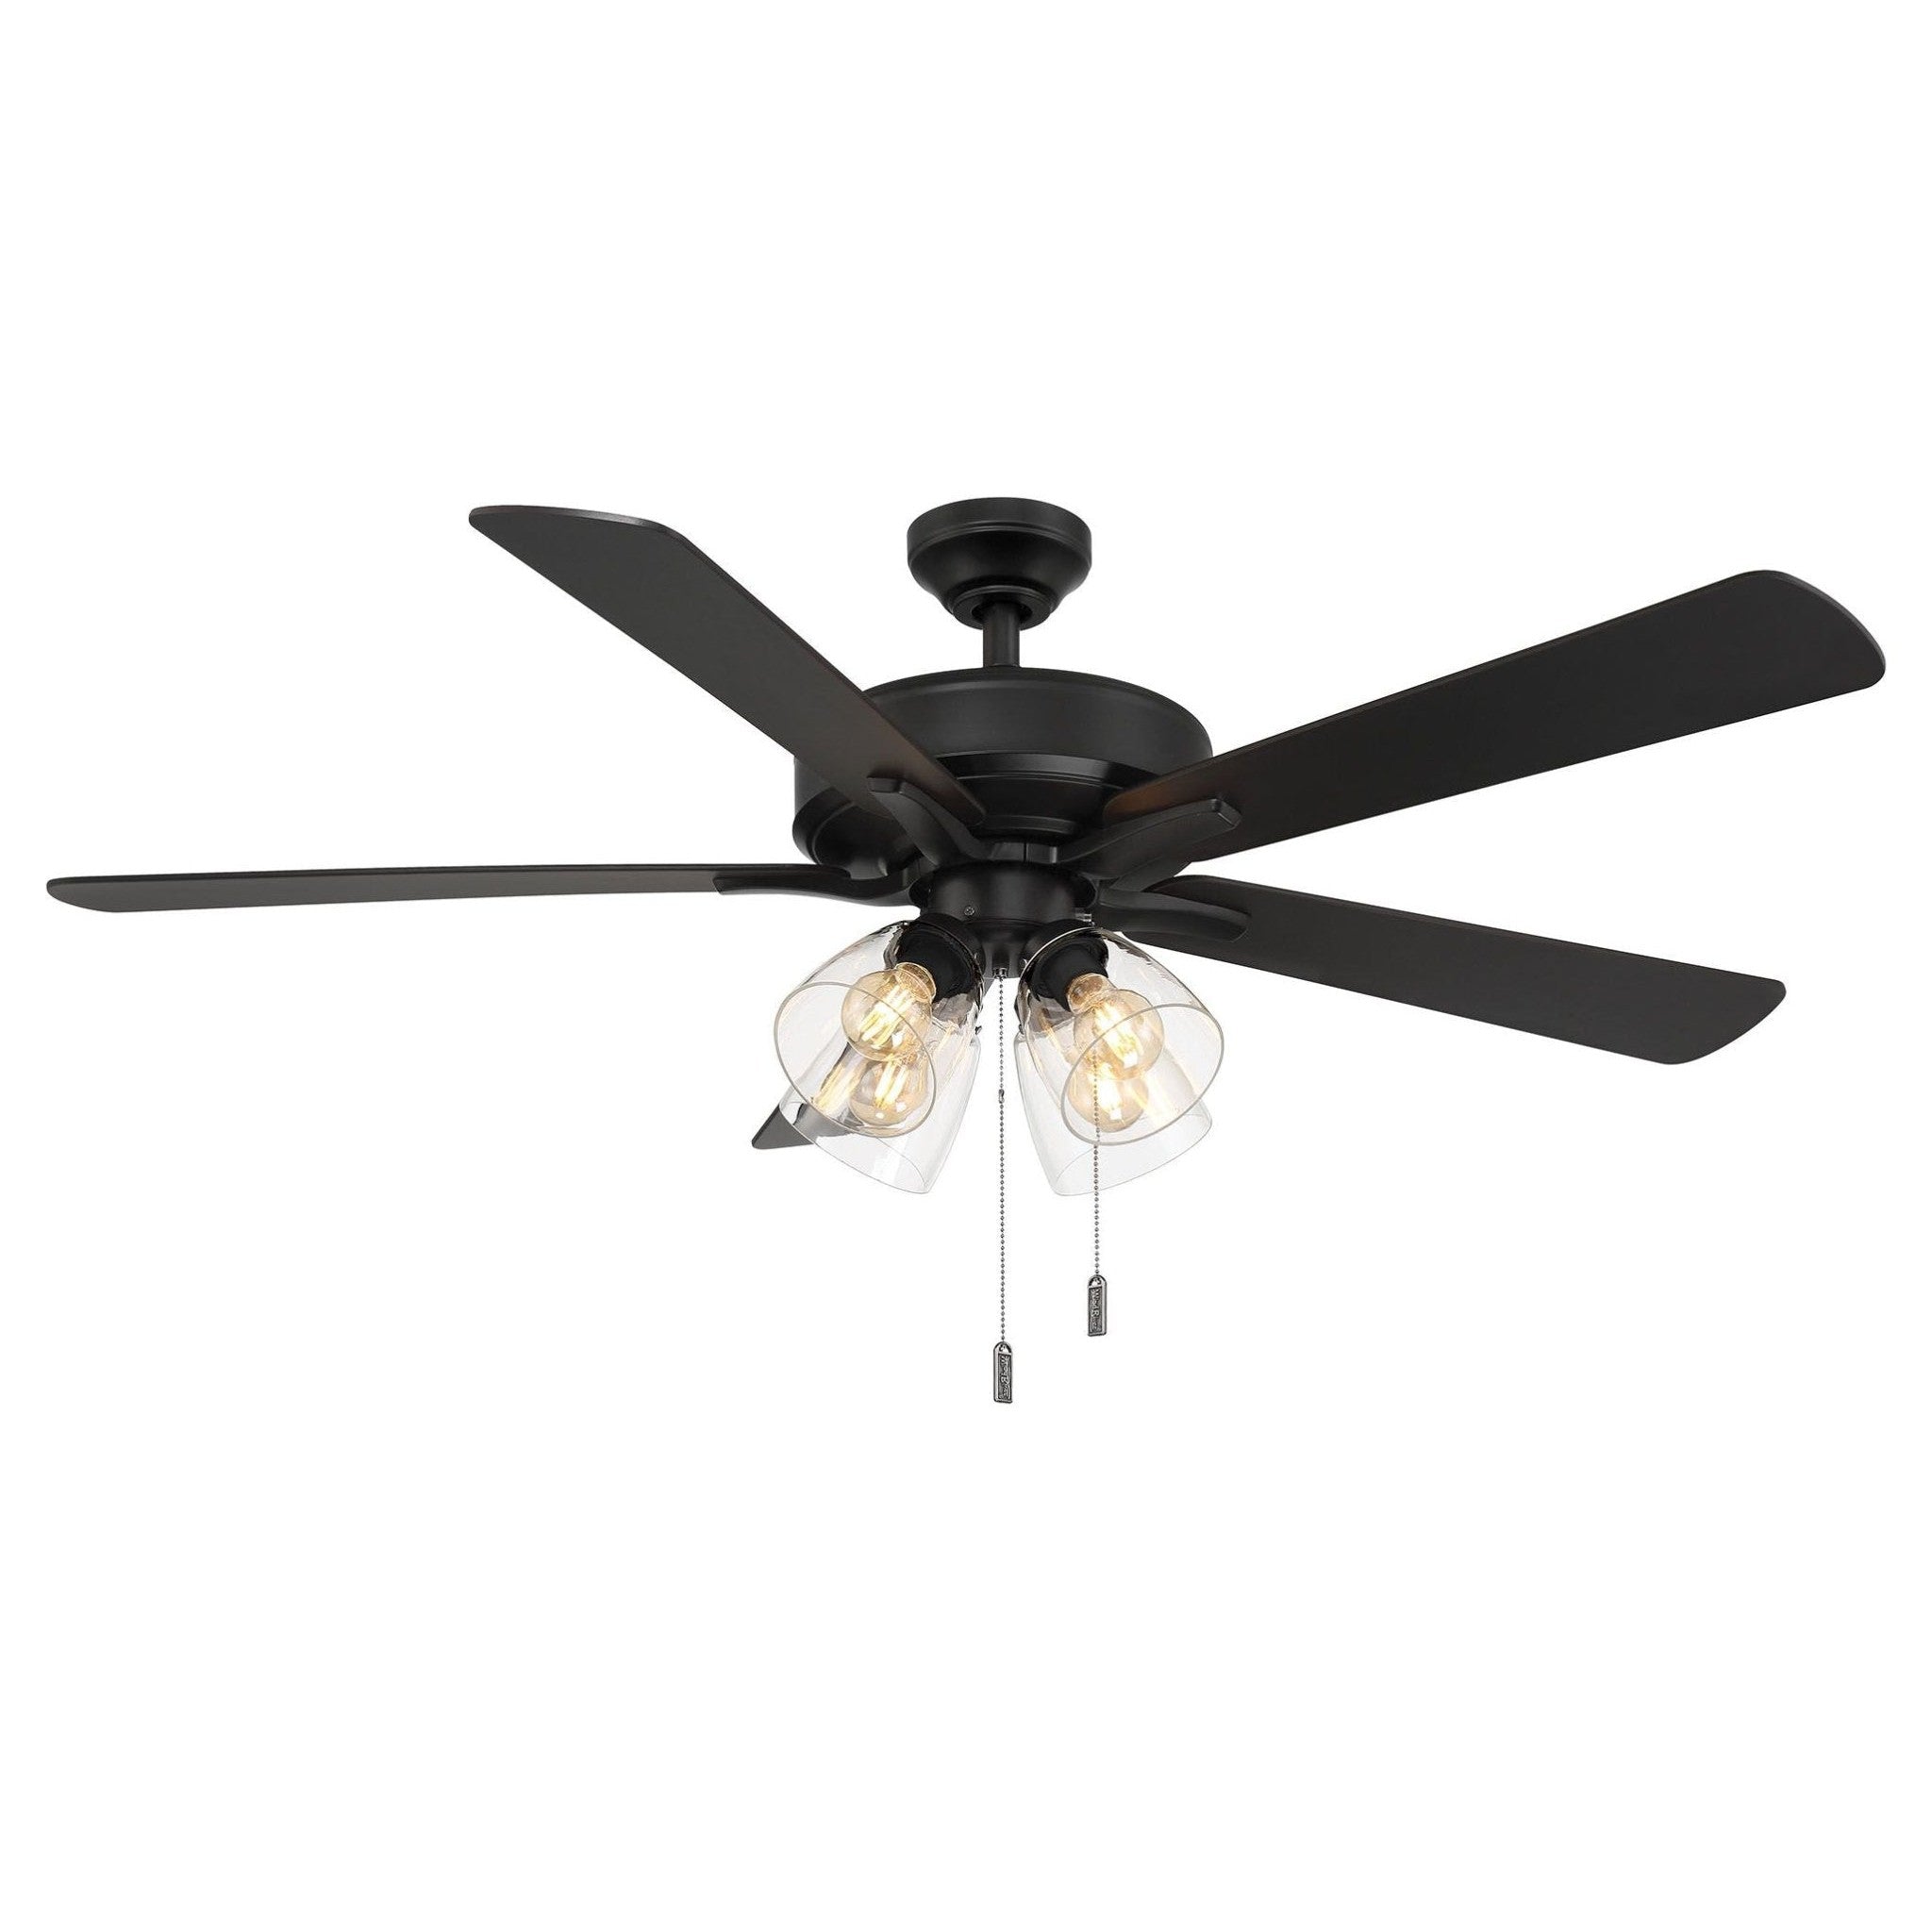 Wind River Pecos 52" 5 Blade Pull Chain LED Ceiling Fan